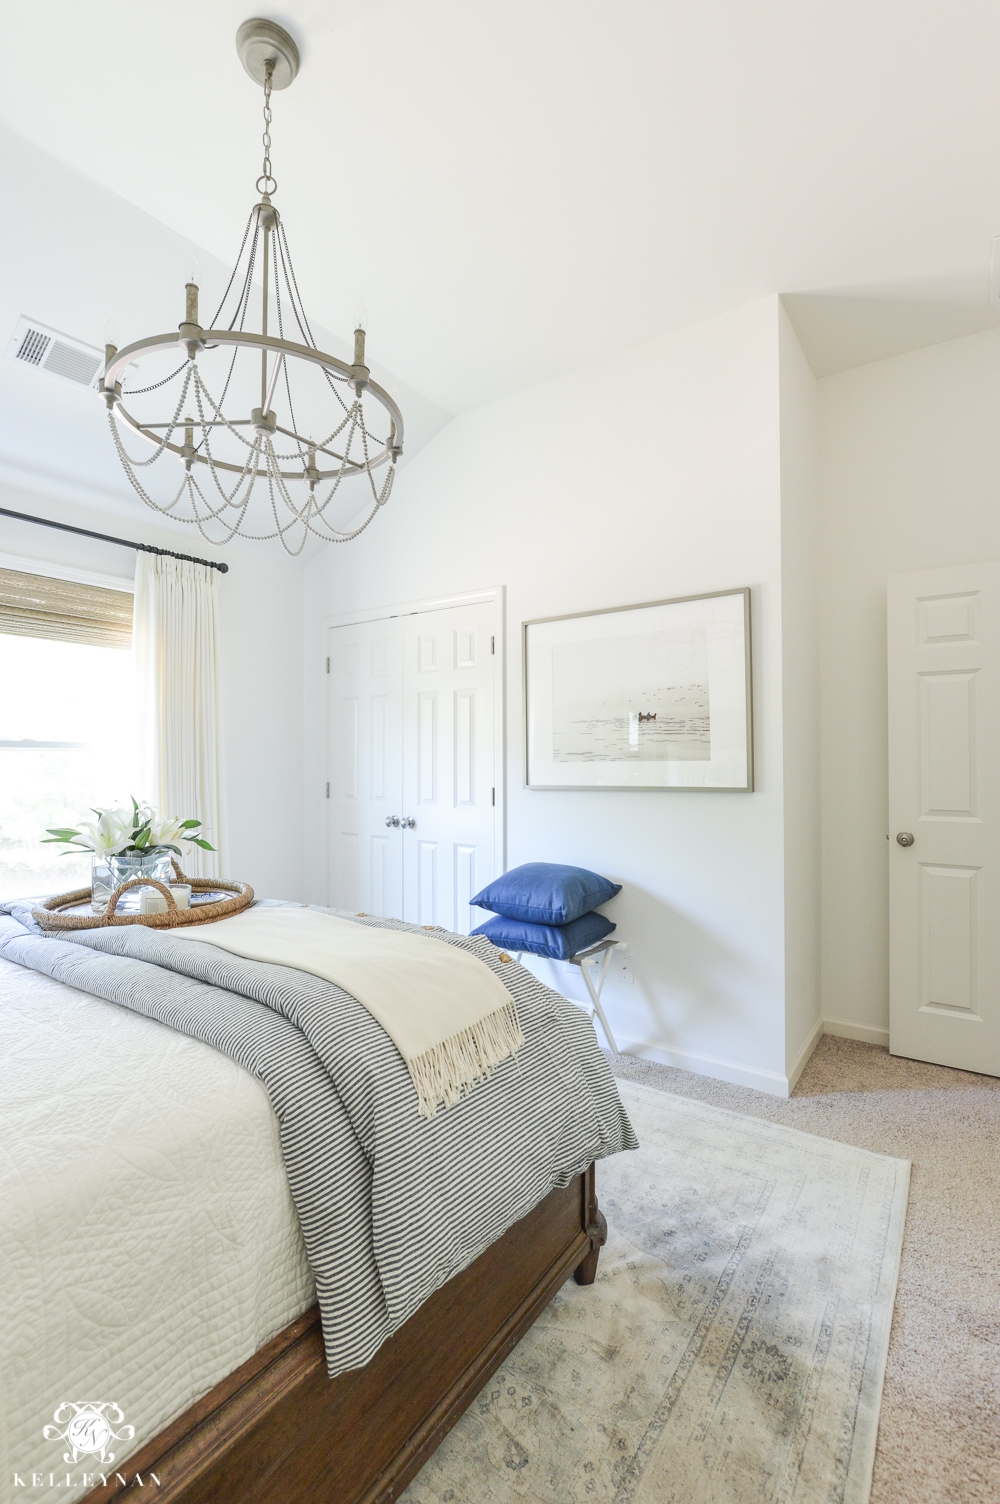 One Room Challenge Blue and White Guest Bedroom Reveal Before and After Makeover guest bedroom with chandelier from vaulted ceiling